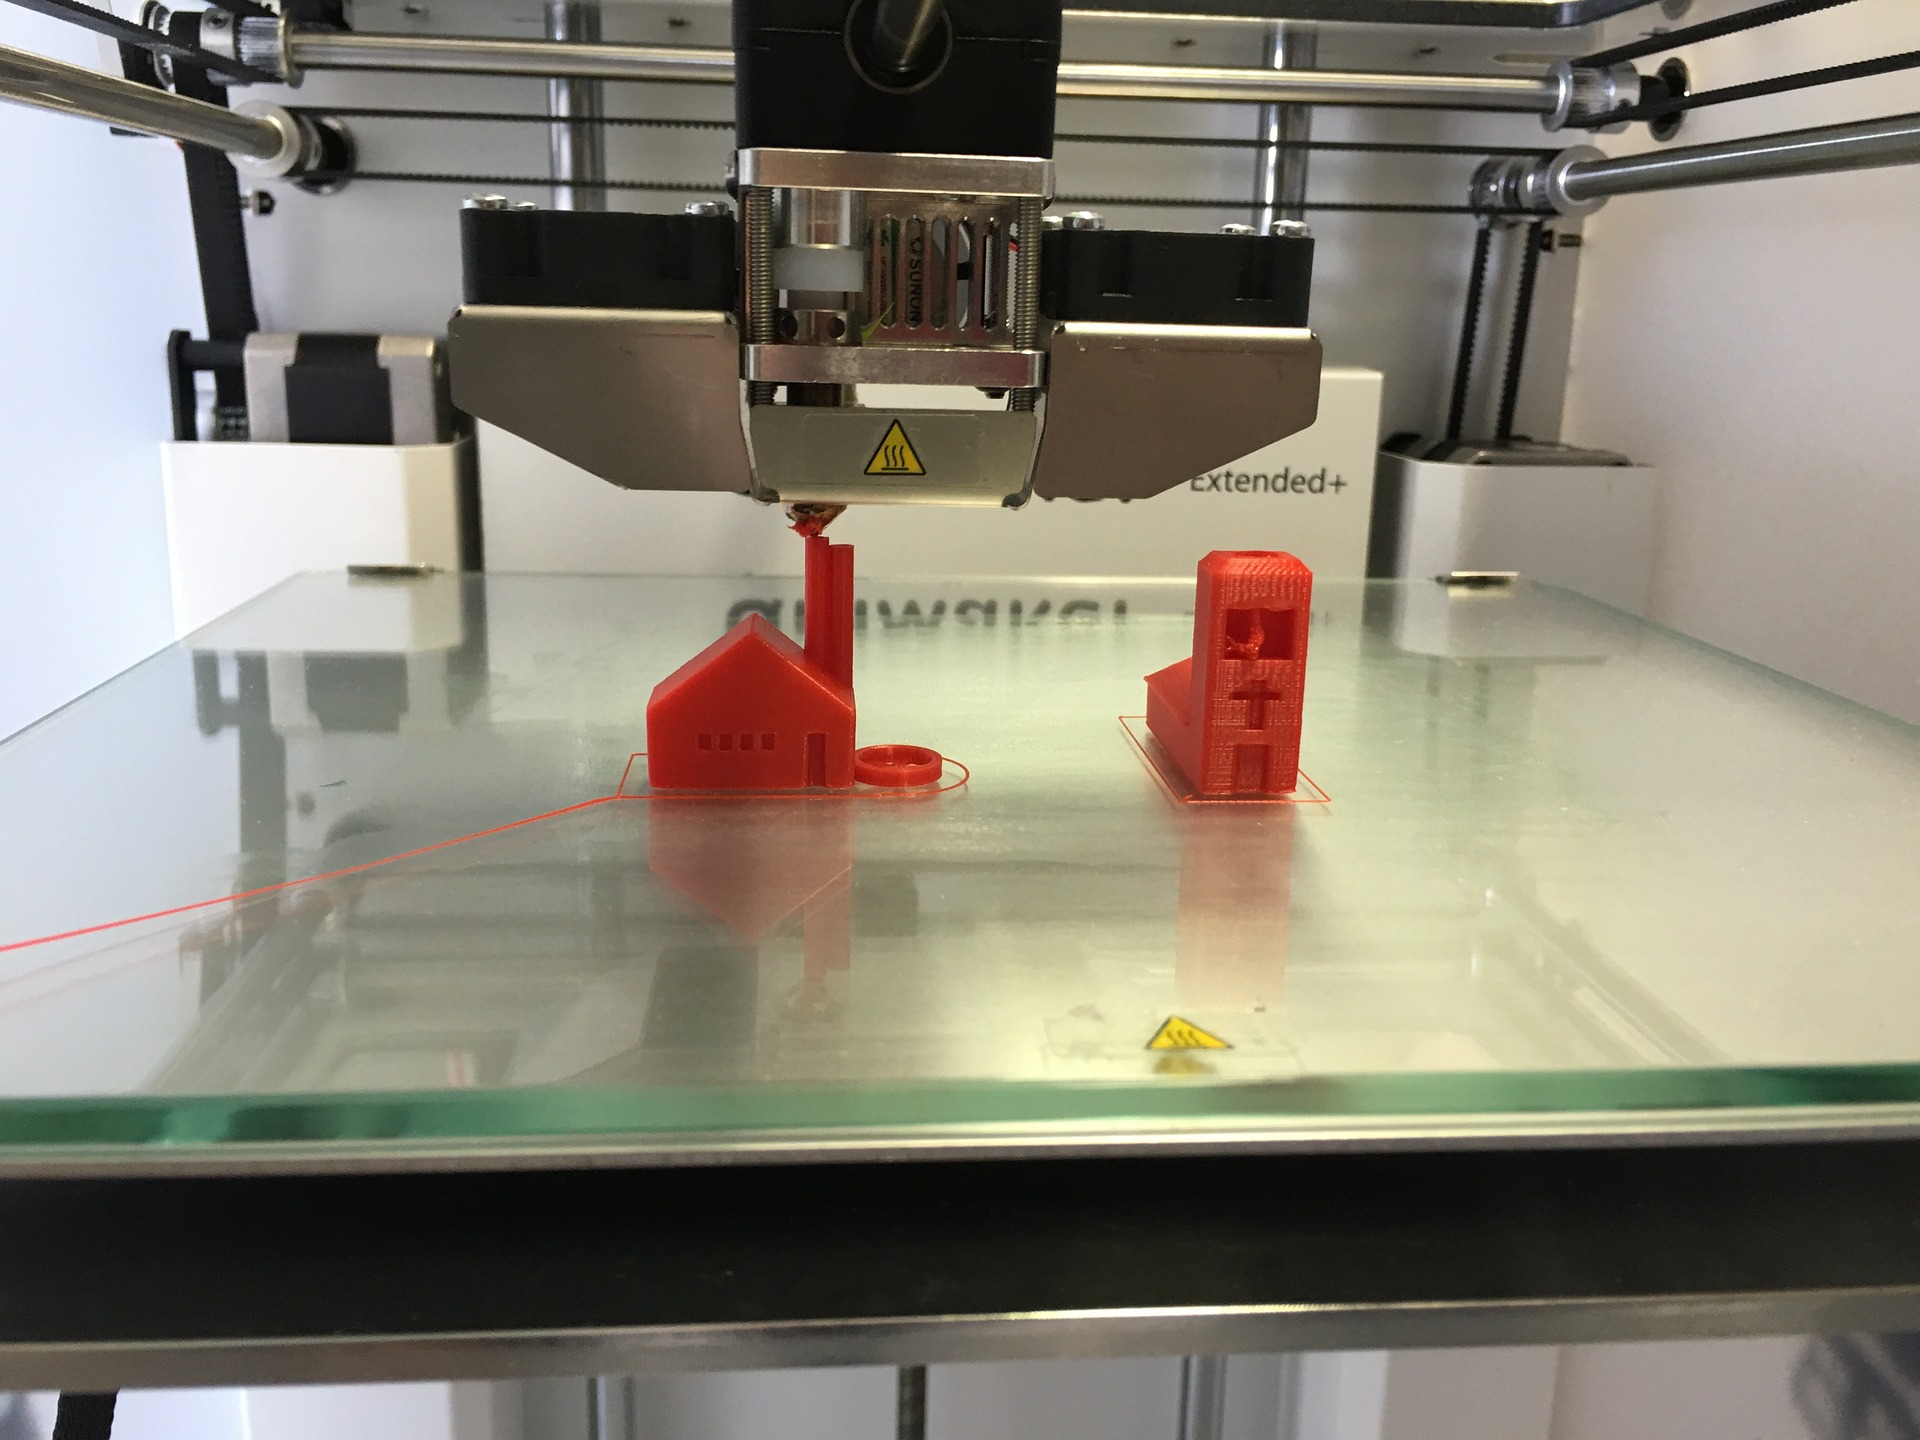 close up view of a plexiglass print bed, the metal gantry of a 3d printer can be seen surrounding, two orange house-shaped models are being printed, the extruder is visible completing printing of one of the houses